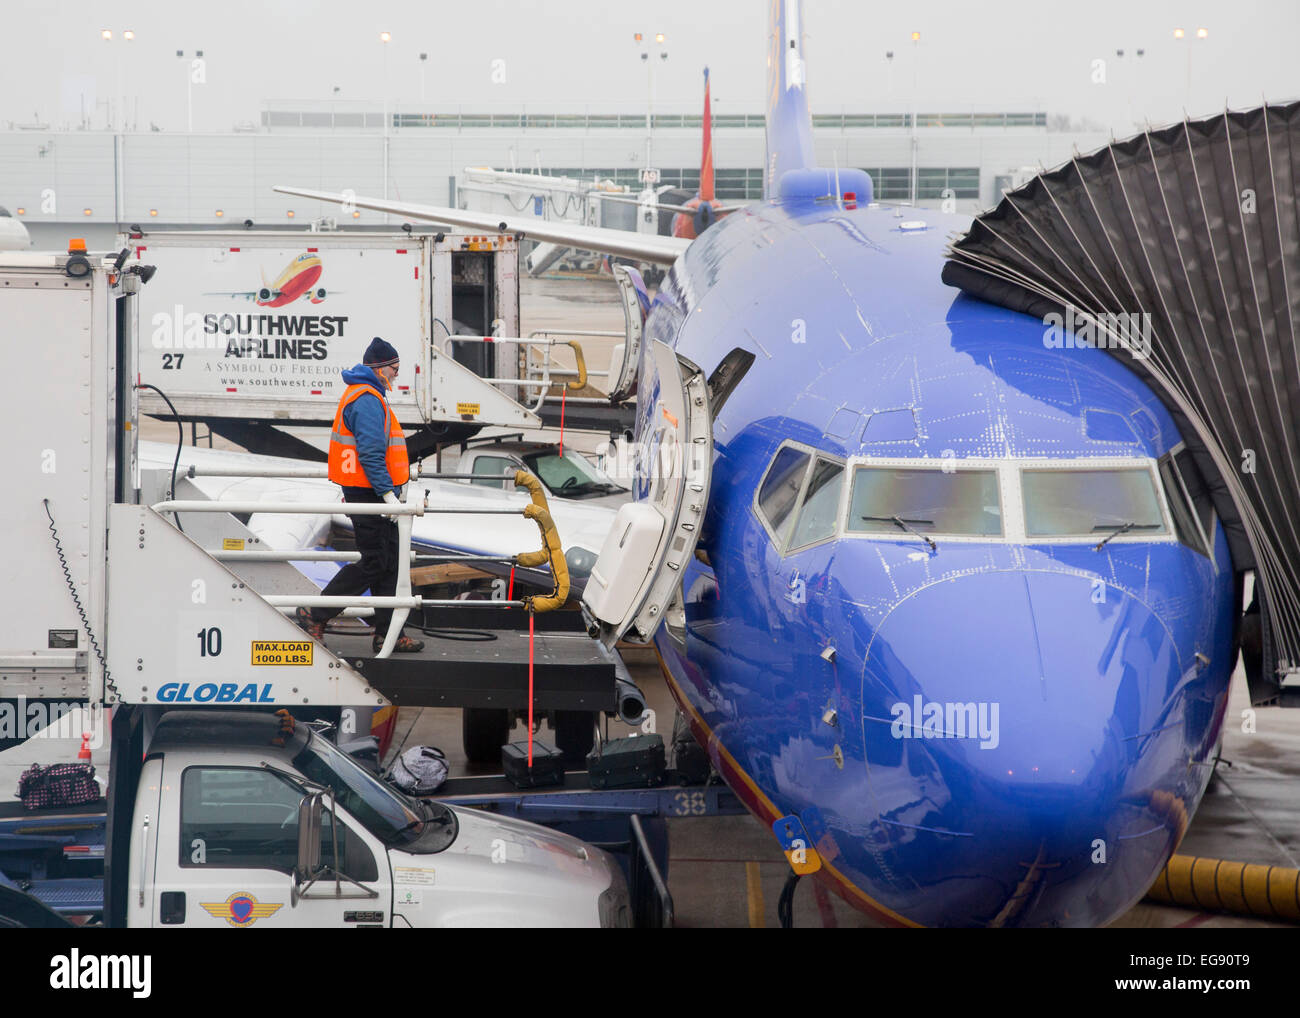 Chicago, Illinois - A member of the Southwest Airlines ground crew at Midway Airport. Stock Photo